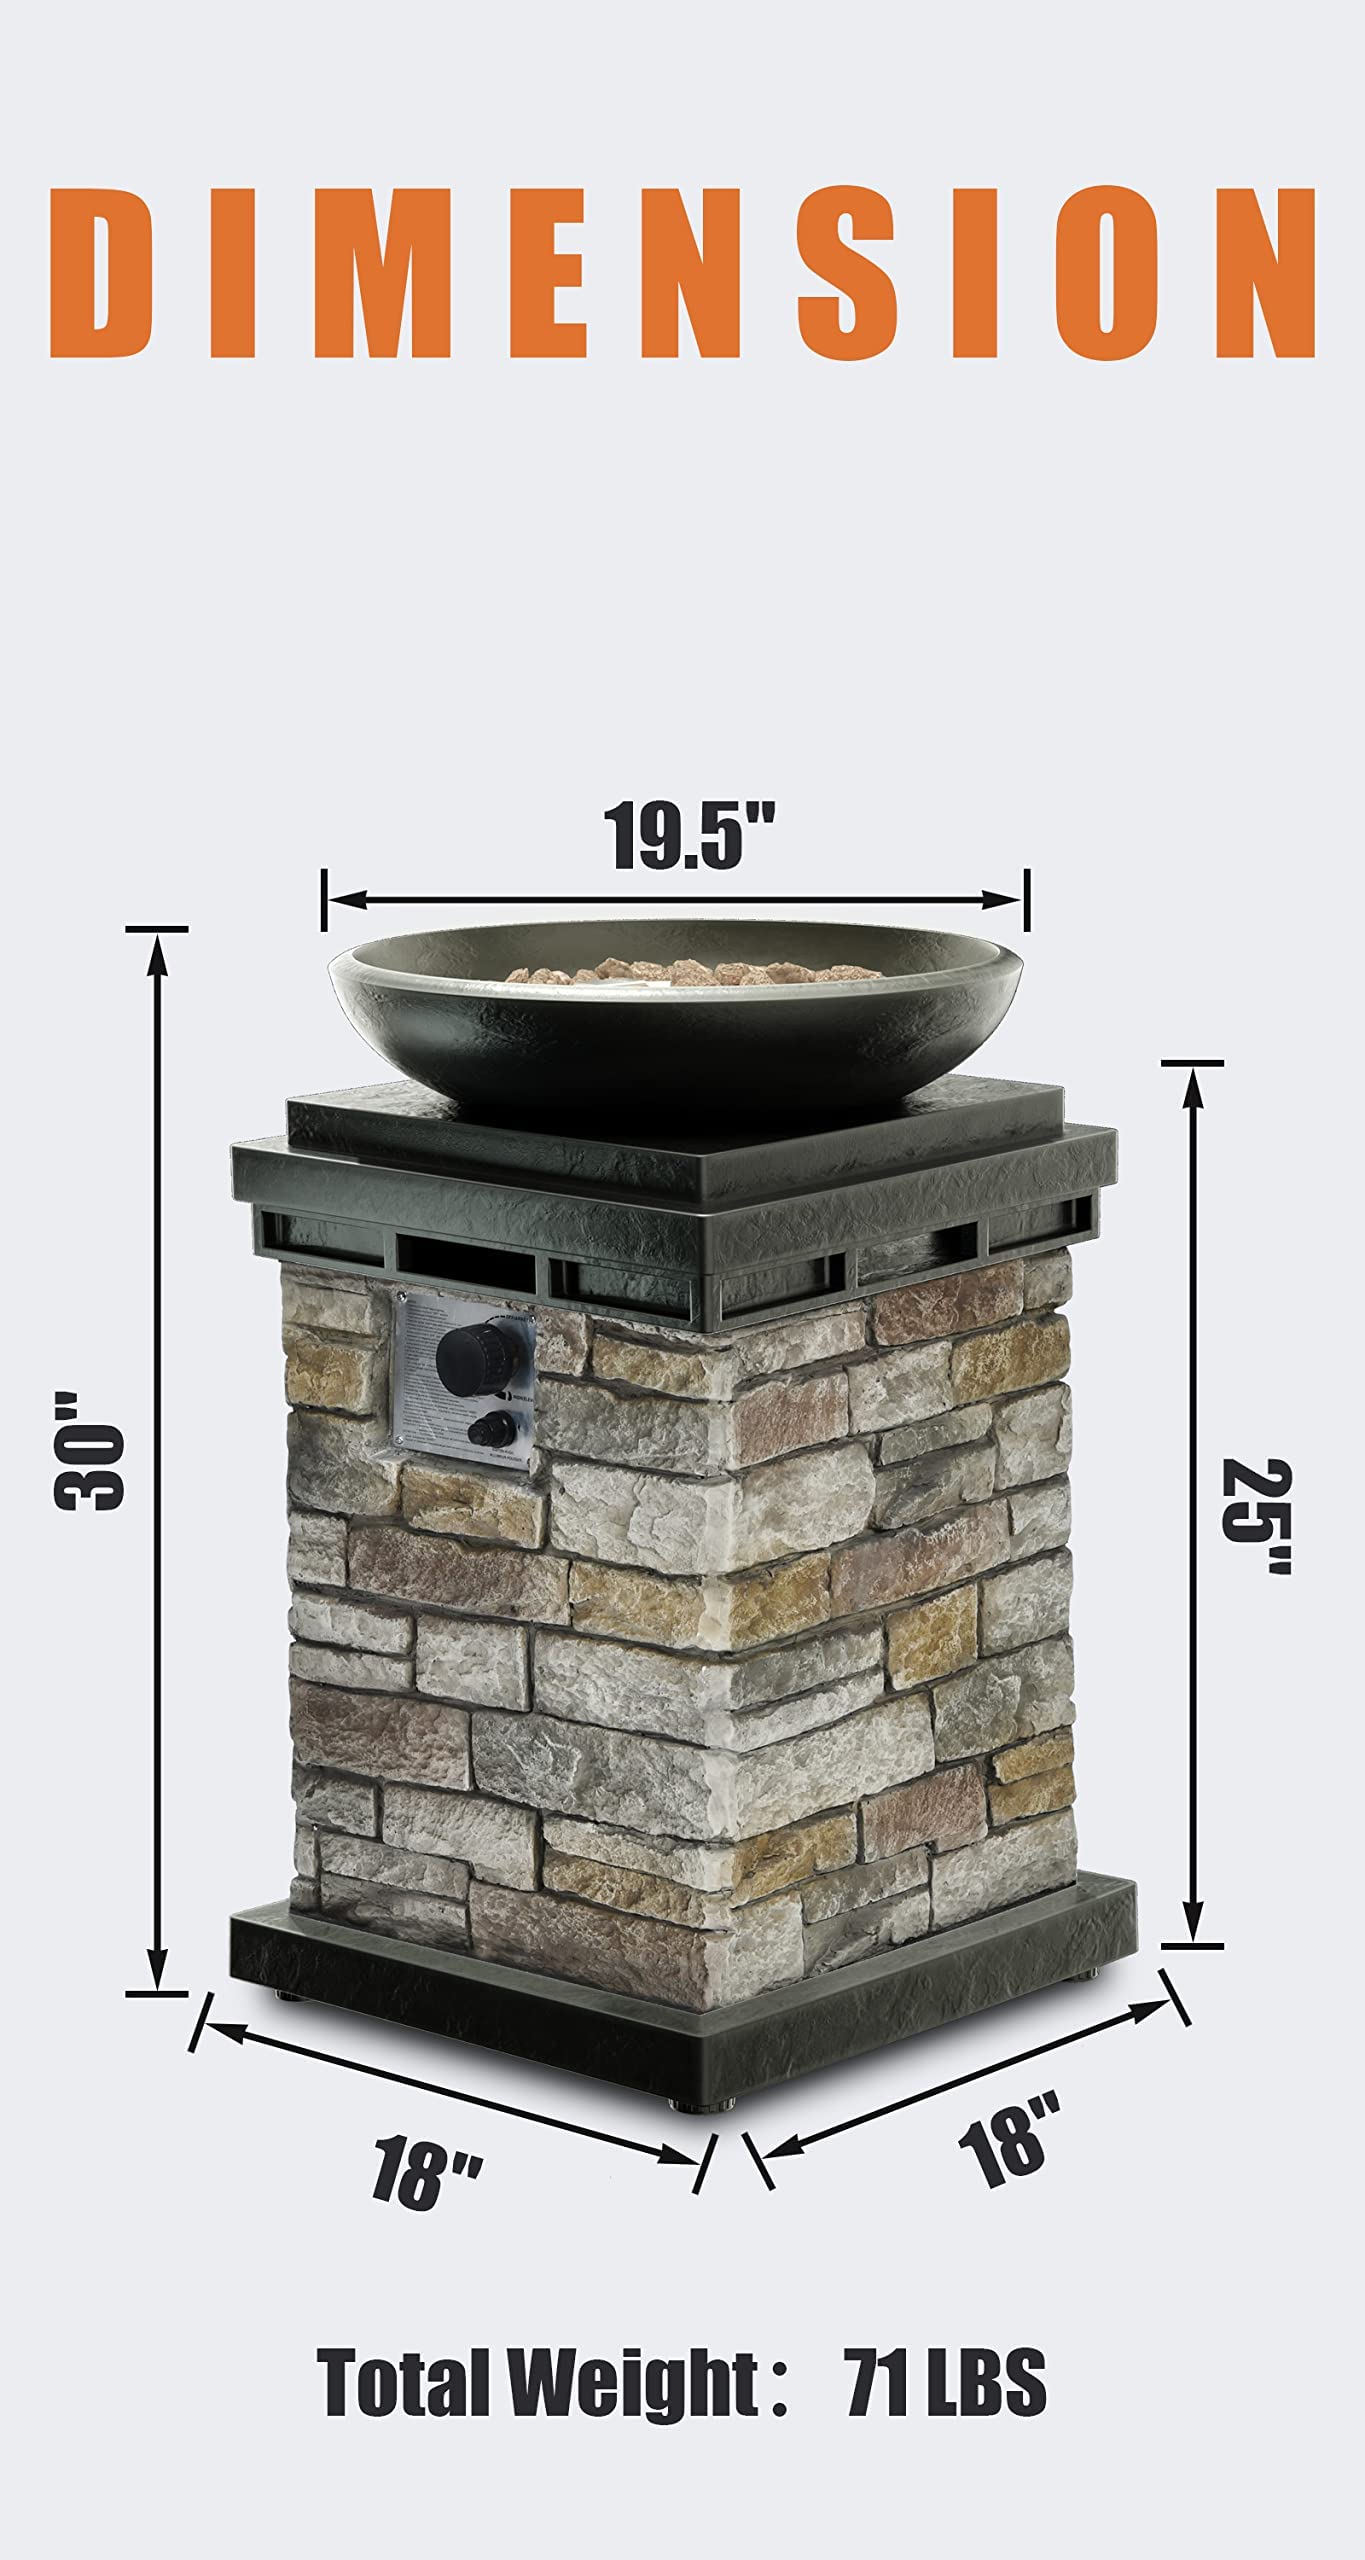 ARLIME Outdoor Propane Burning Fire Bowl, Propane Firebowl Column Realistic Look Firepit Heater, 40,000 BTU Outdoor Gas Fire Pit with Free Lava Rocks, Fits 20lb Tank Inside, Raincover